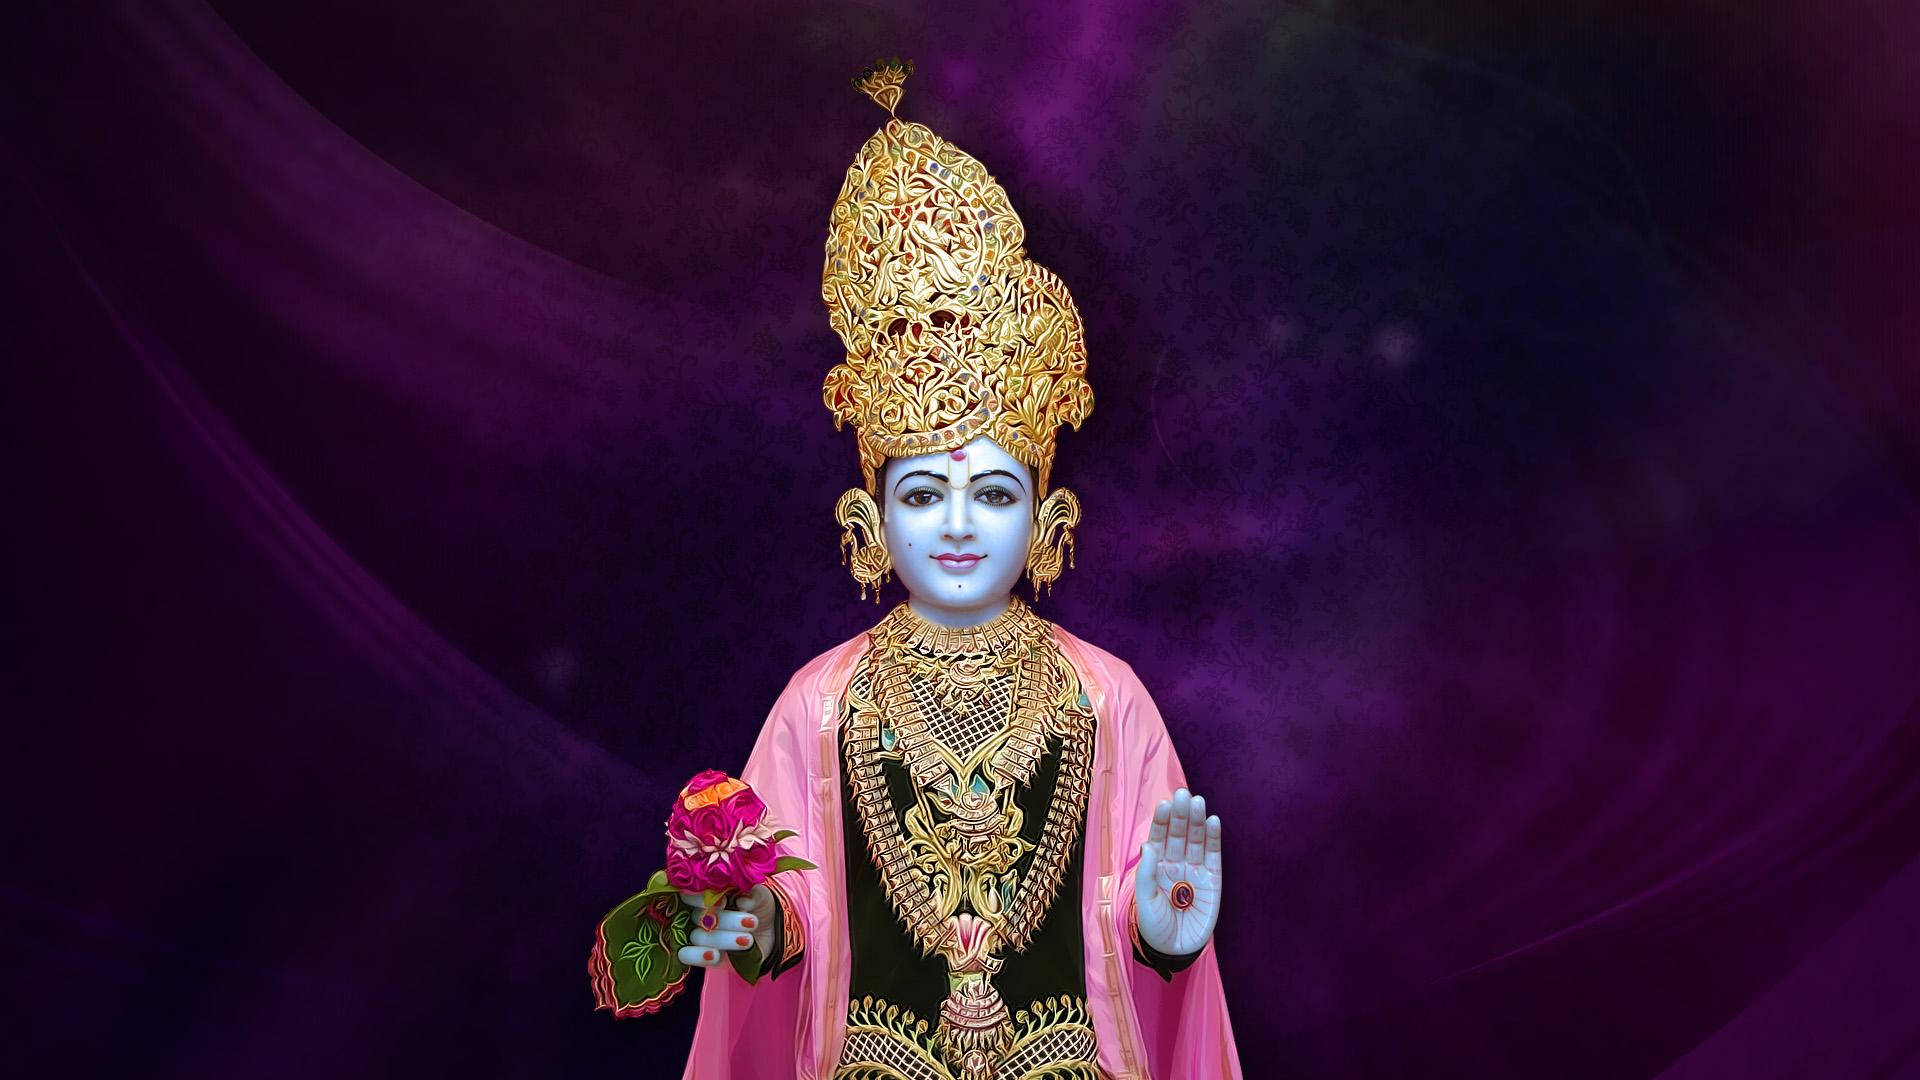 Swaminarayan Covered In Jewelry Wallpaper